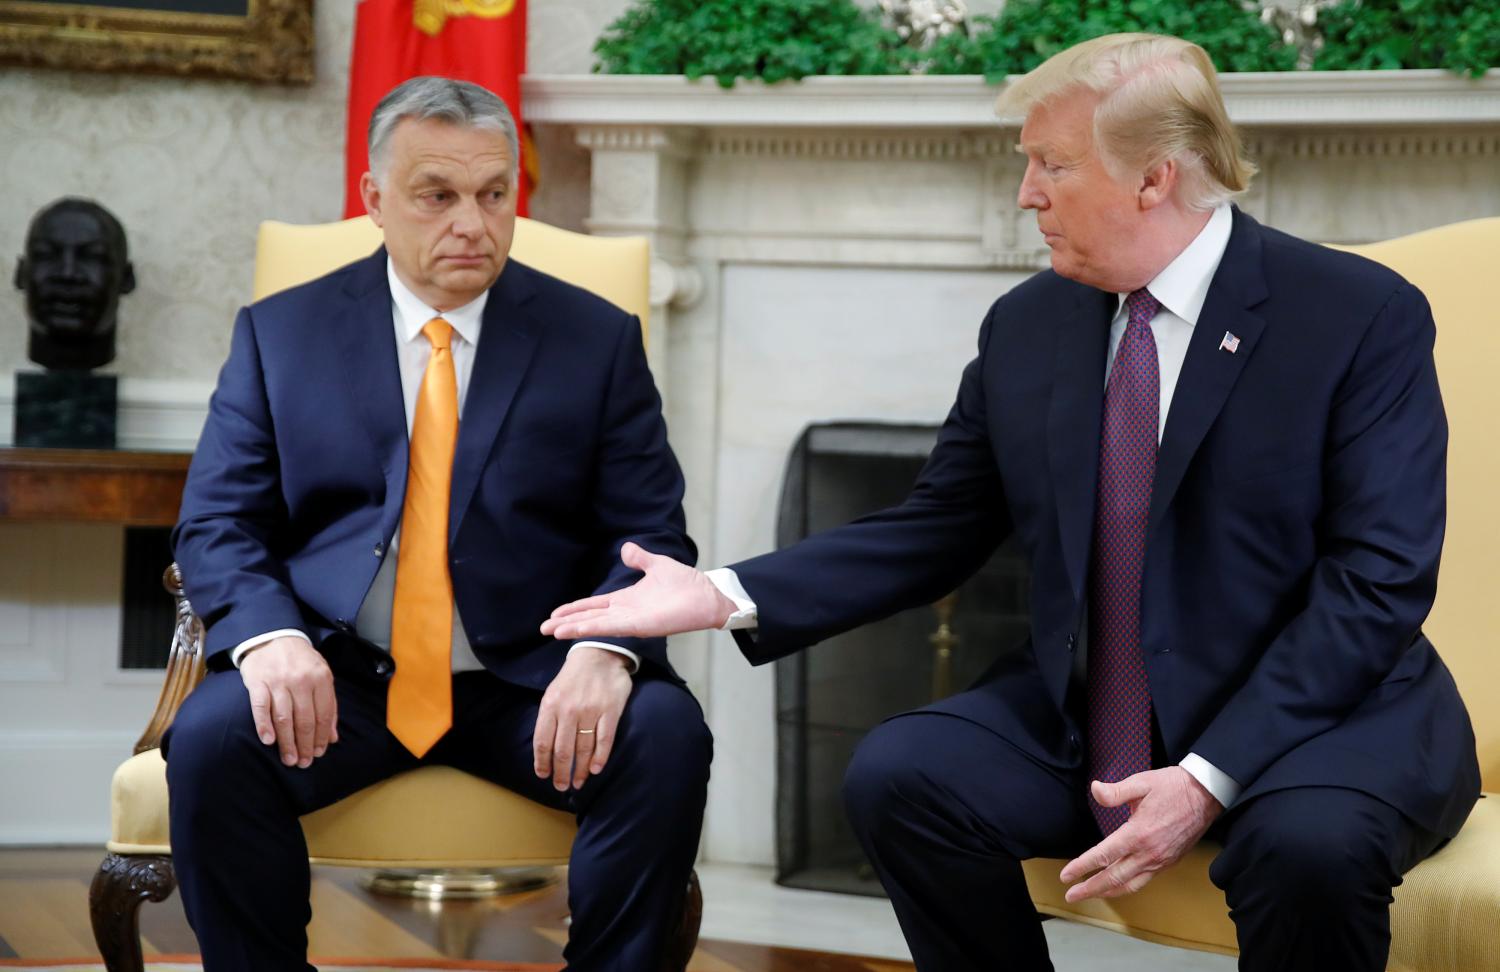 U.S. President Donald Trump greets Hungary's Prime Minister Viktor Orban in the Oval Office at the White House in Washington, U.S., May 13, 2019. REUTERS/Carlos Barria - RC1AB086D0B0